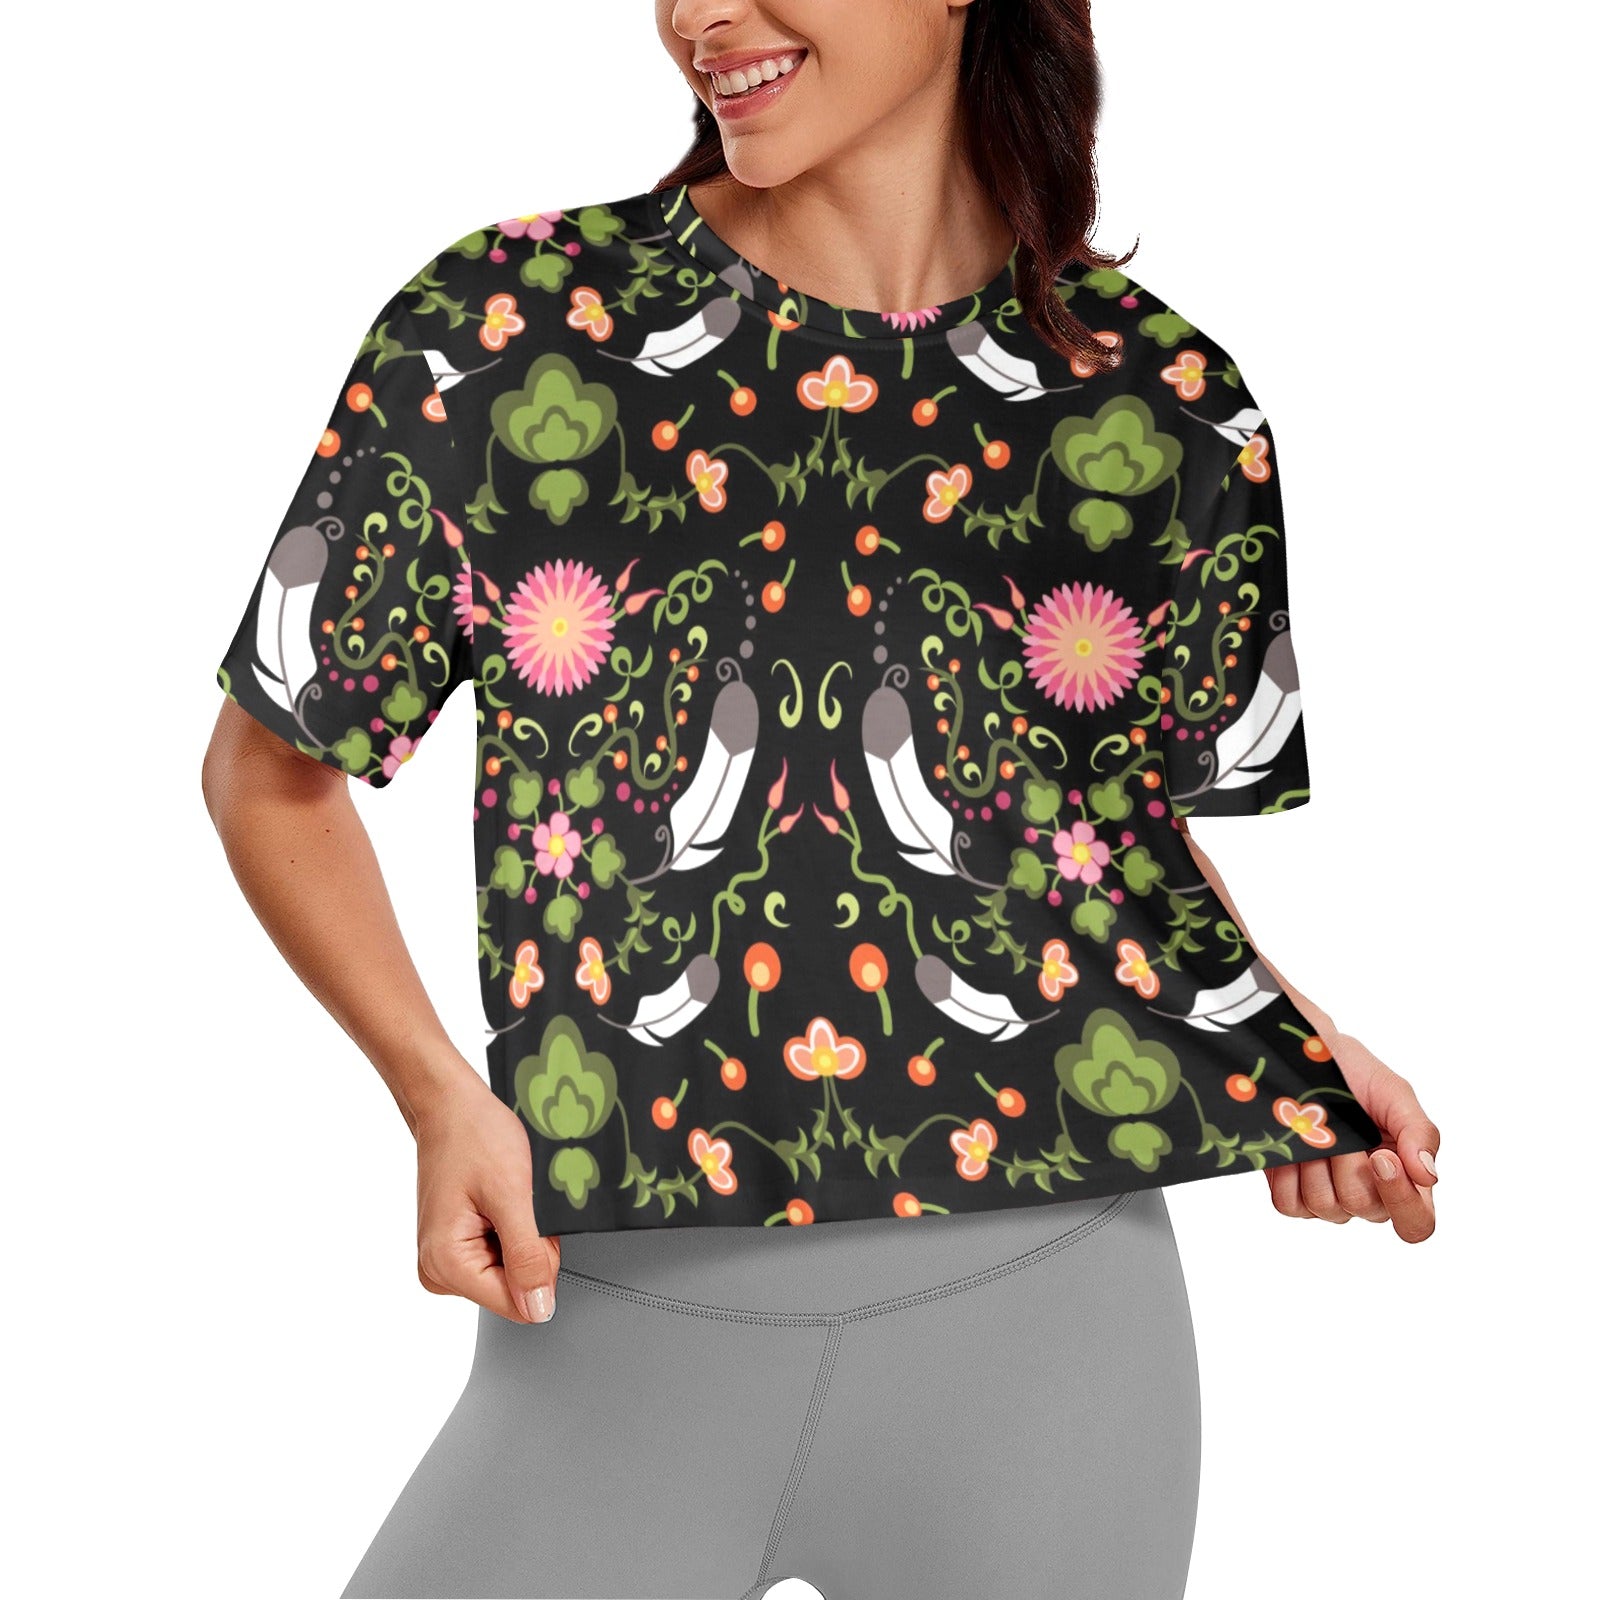 New Growth Women's Cropped T-shirt